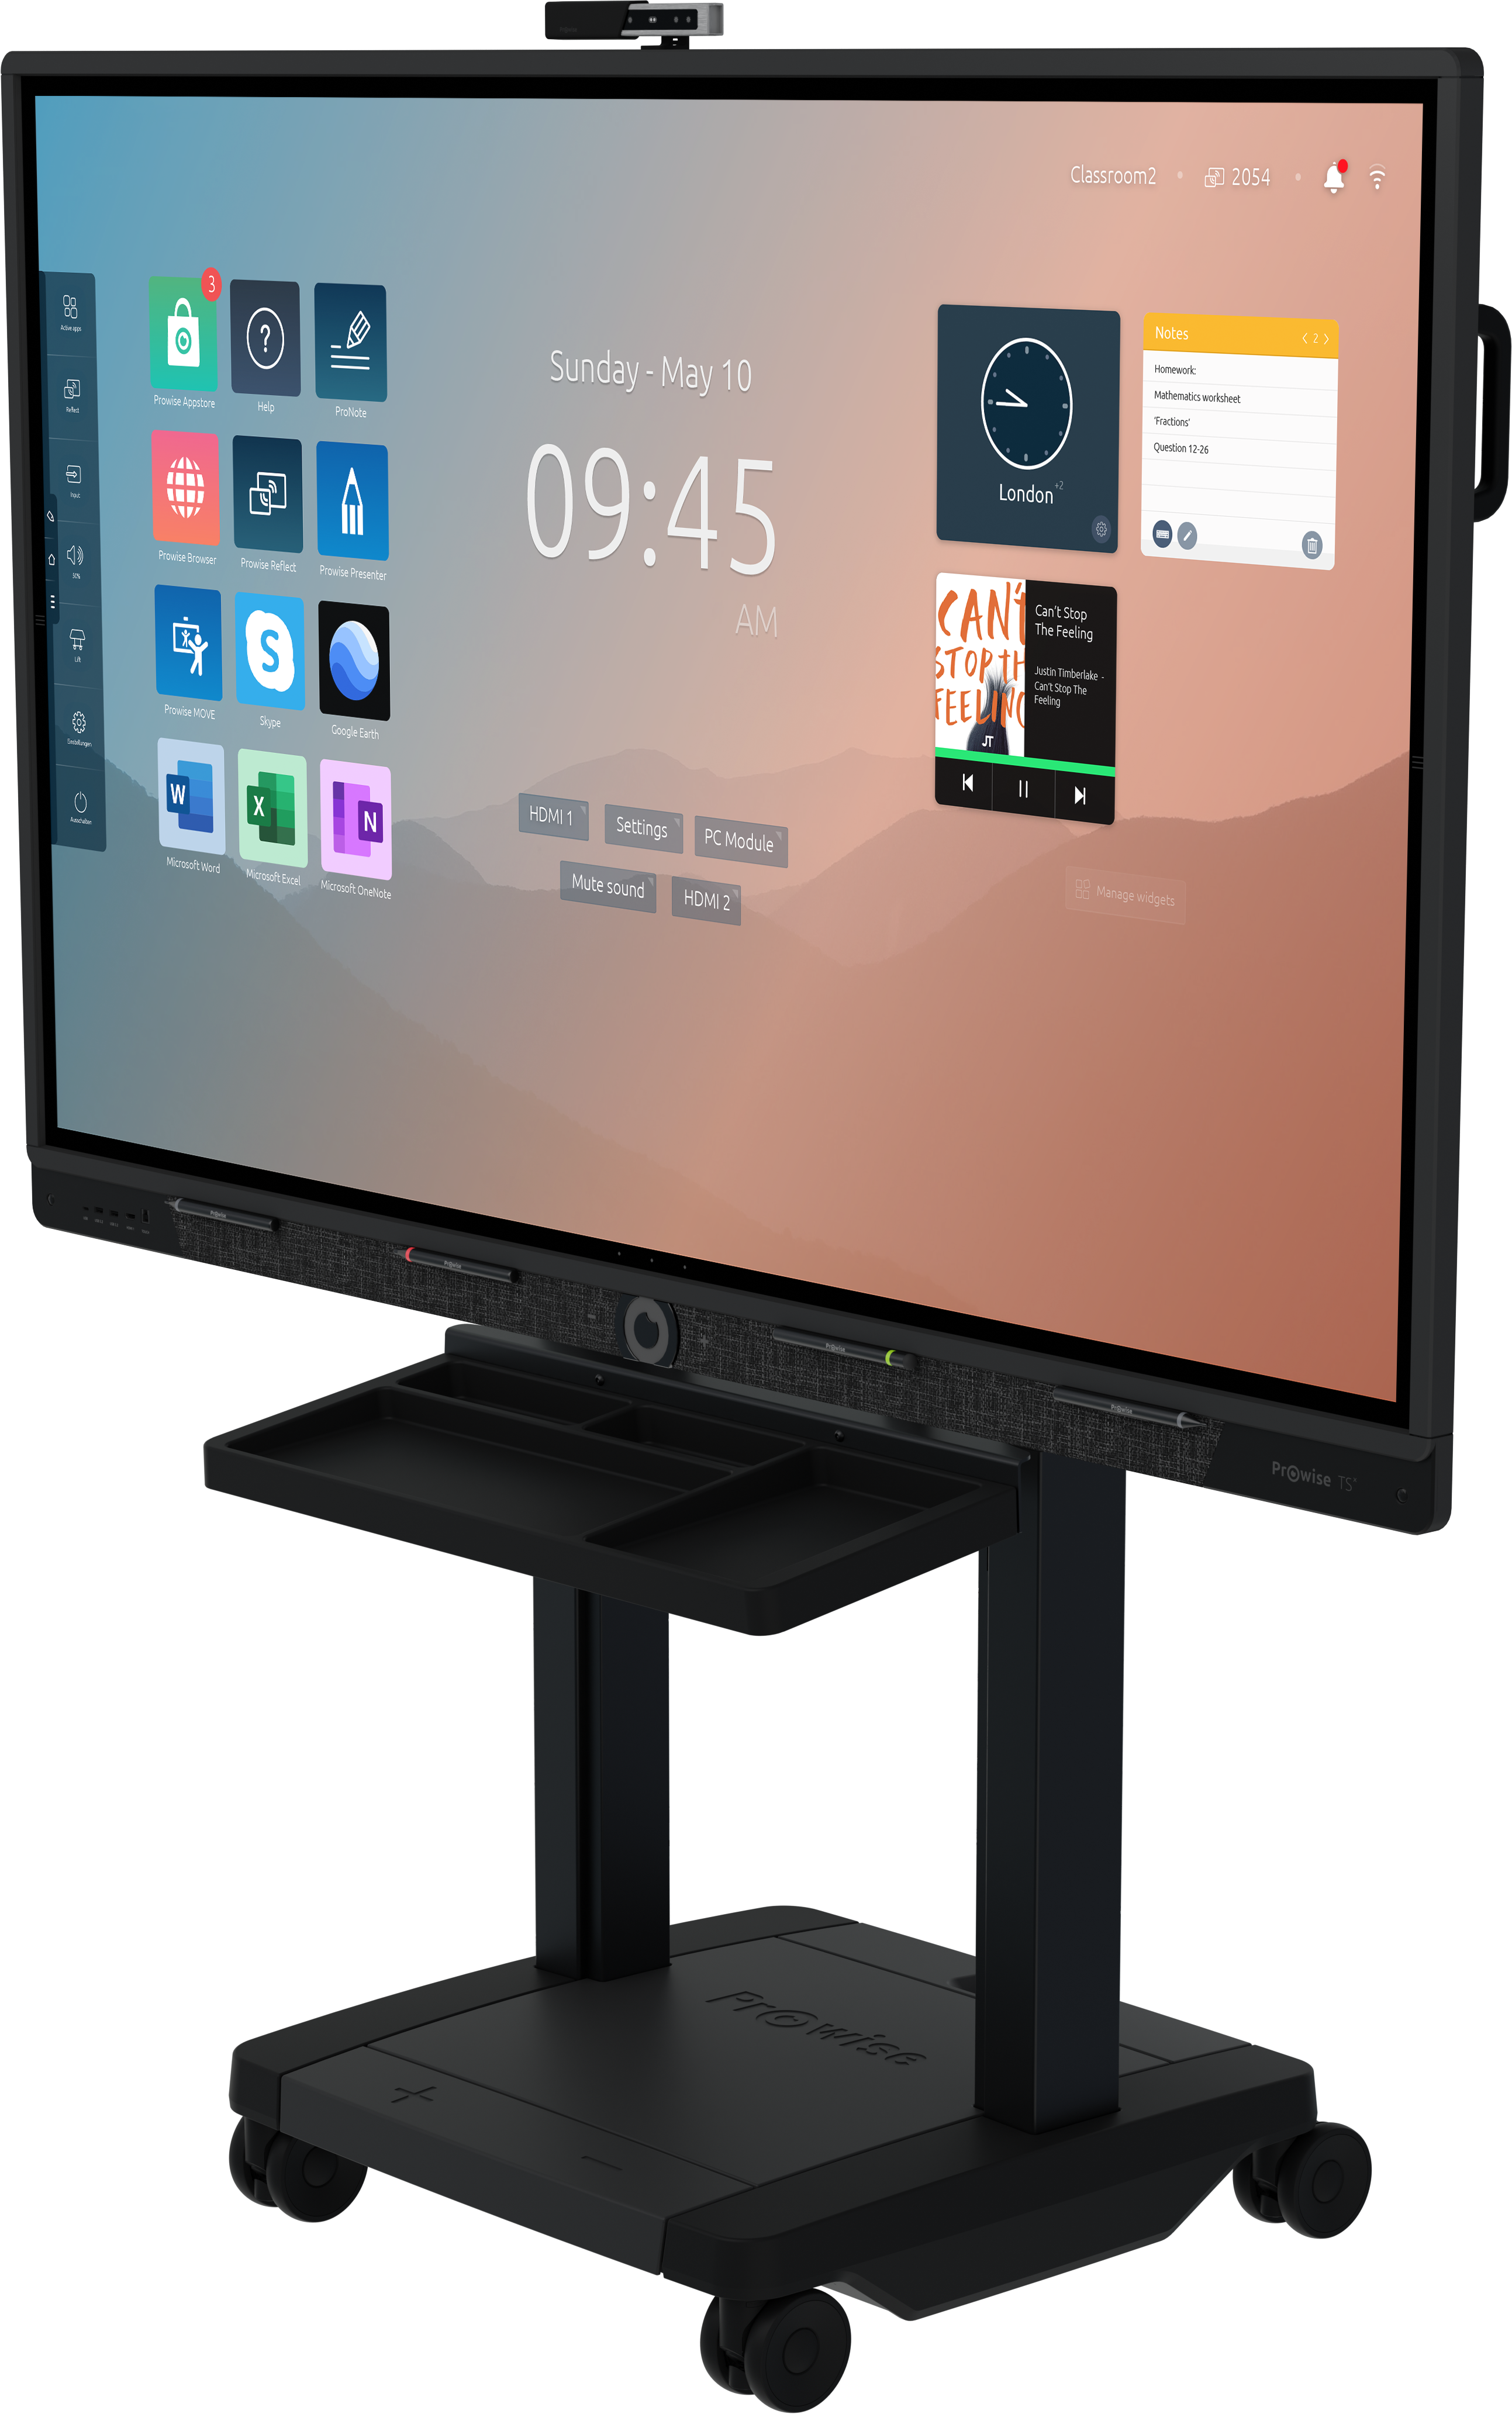 Prowise Touchscreen